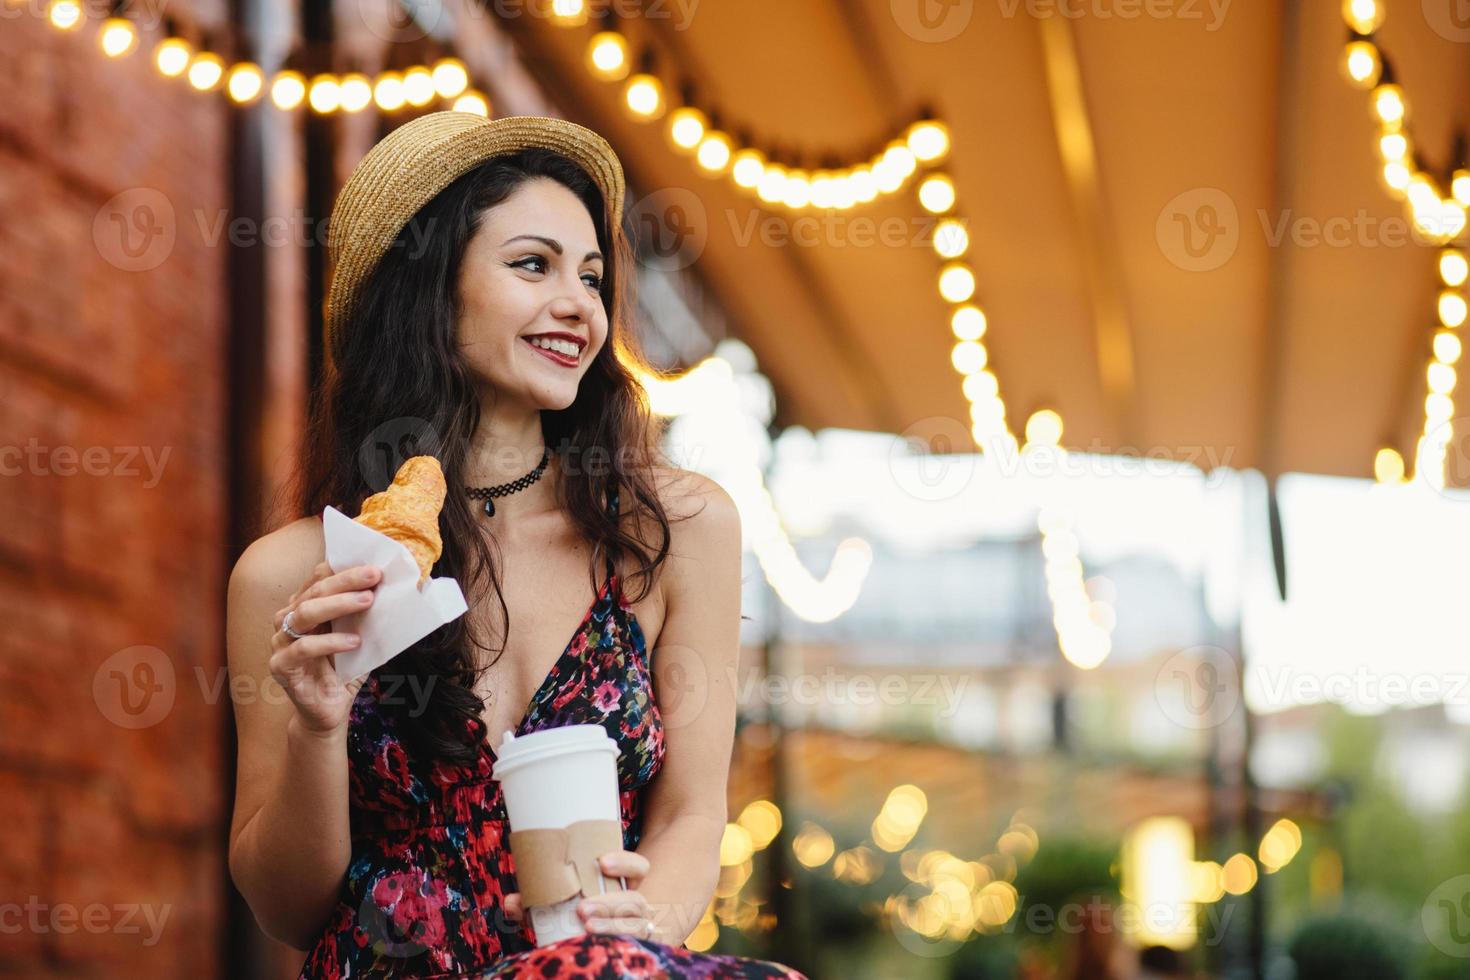 Delightful brunette female with pleasant appearance wearing summer hat and dress holding croissant and takeaway coffee, resting at terrace looking aside with happy expression. People, recreation photo